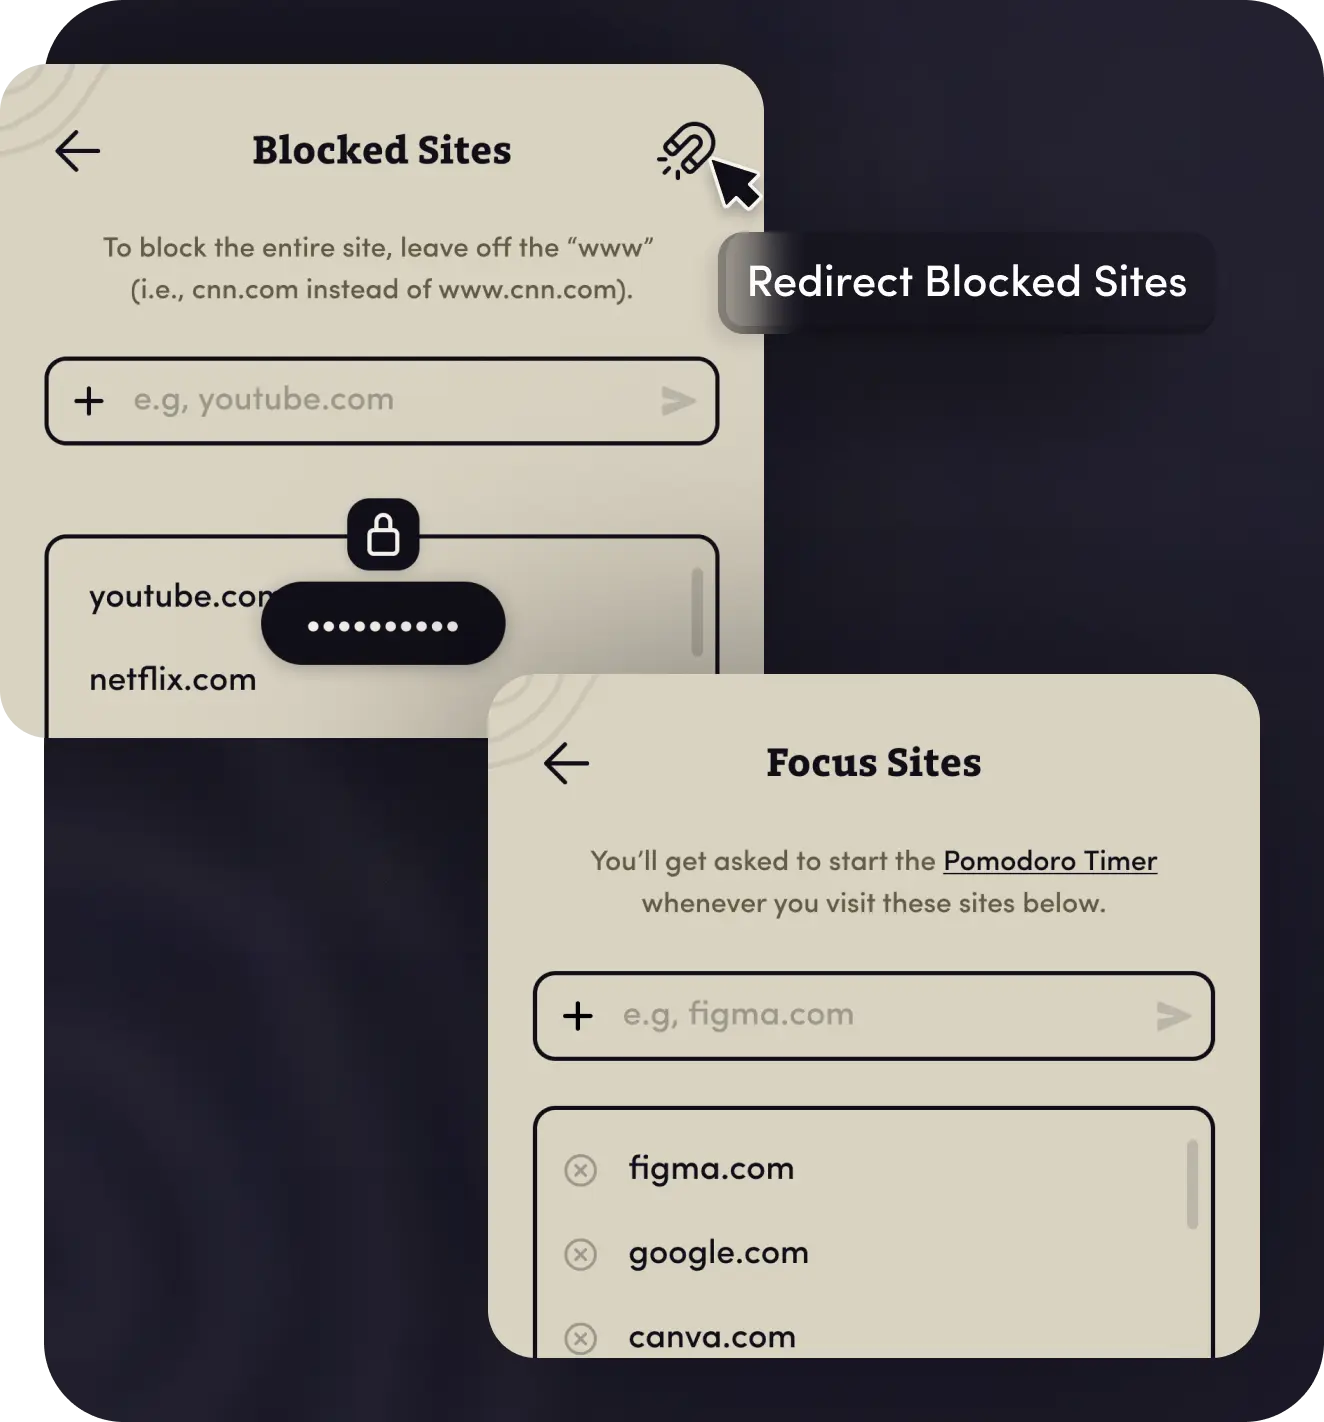 Intentio's blocked and focus sites list, including the redirect blocked site feature.